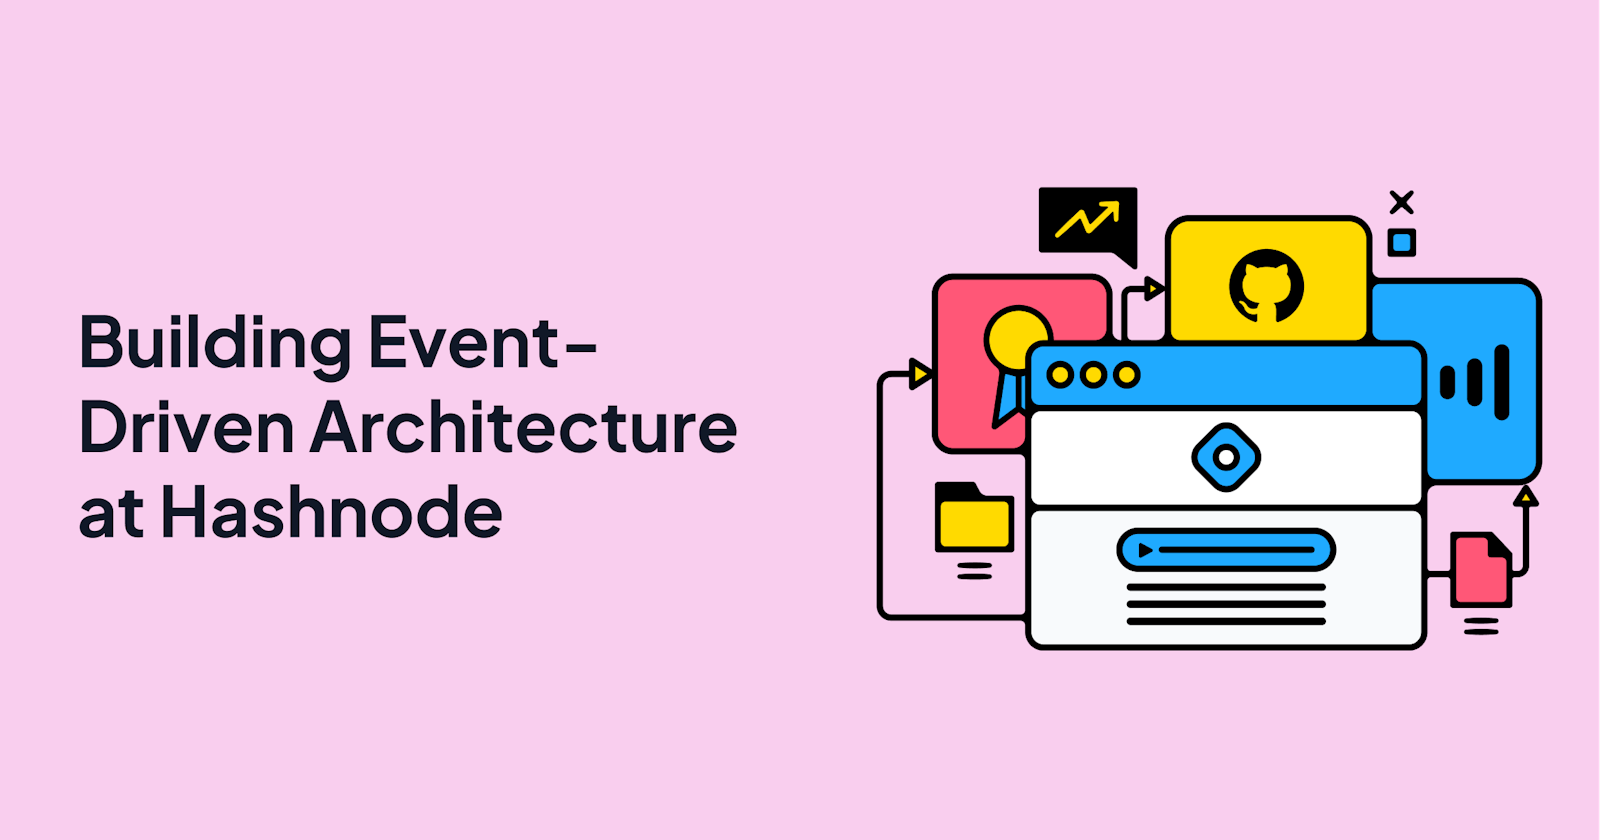 Building an Event-Driven Architecture at Hashnode.